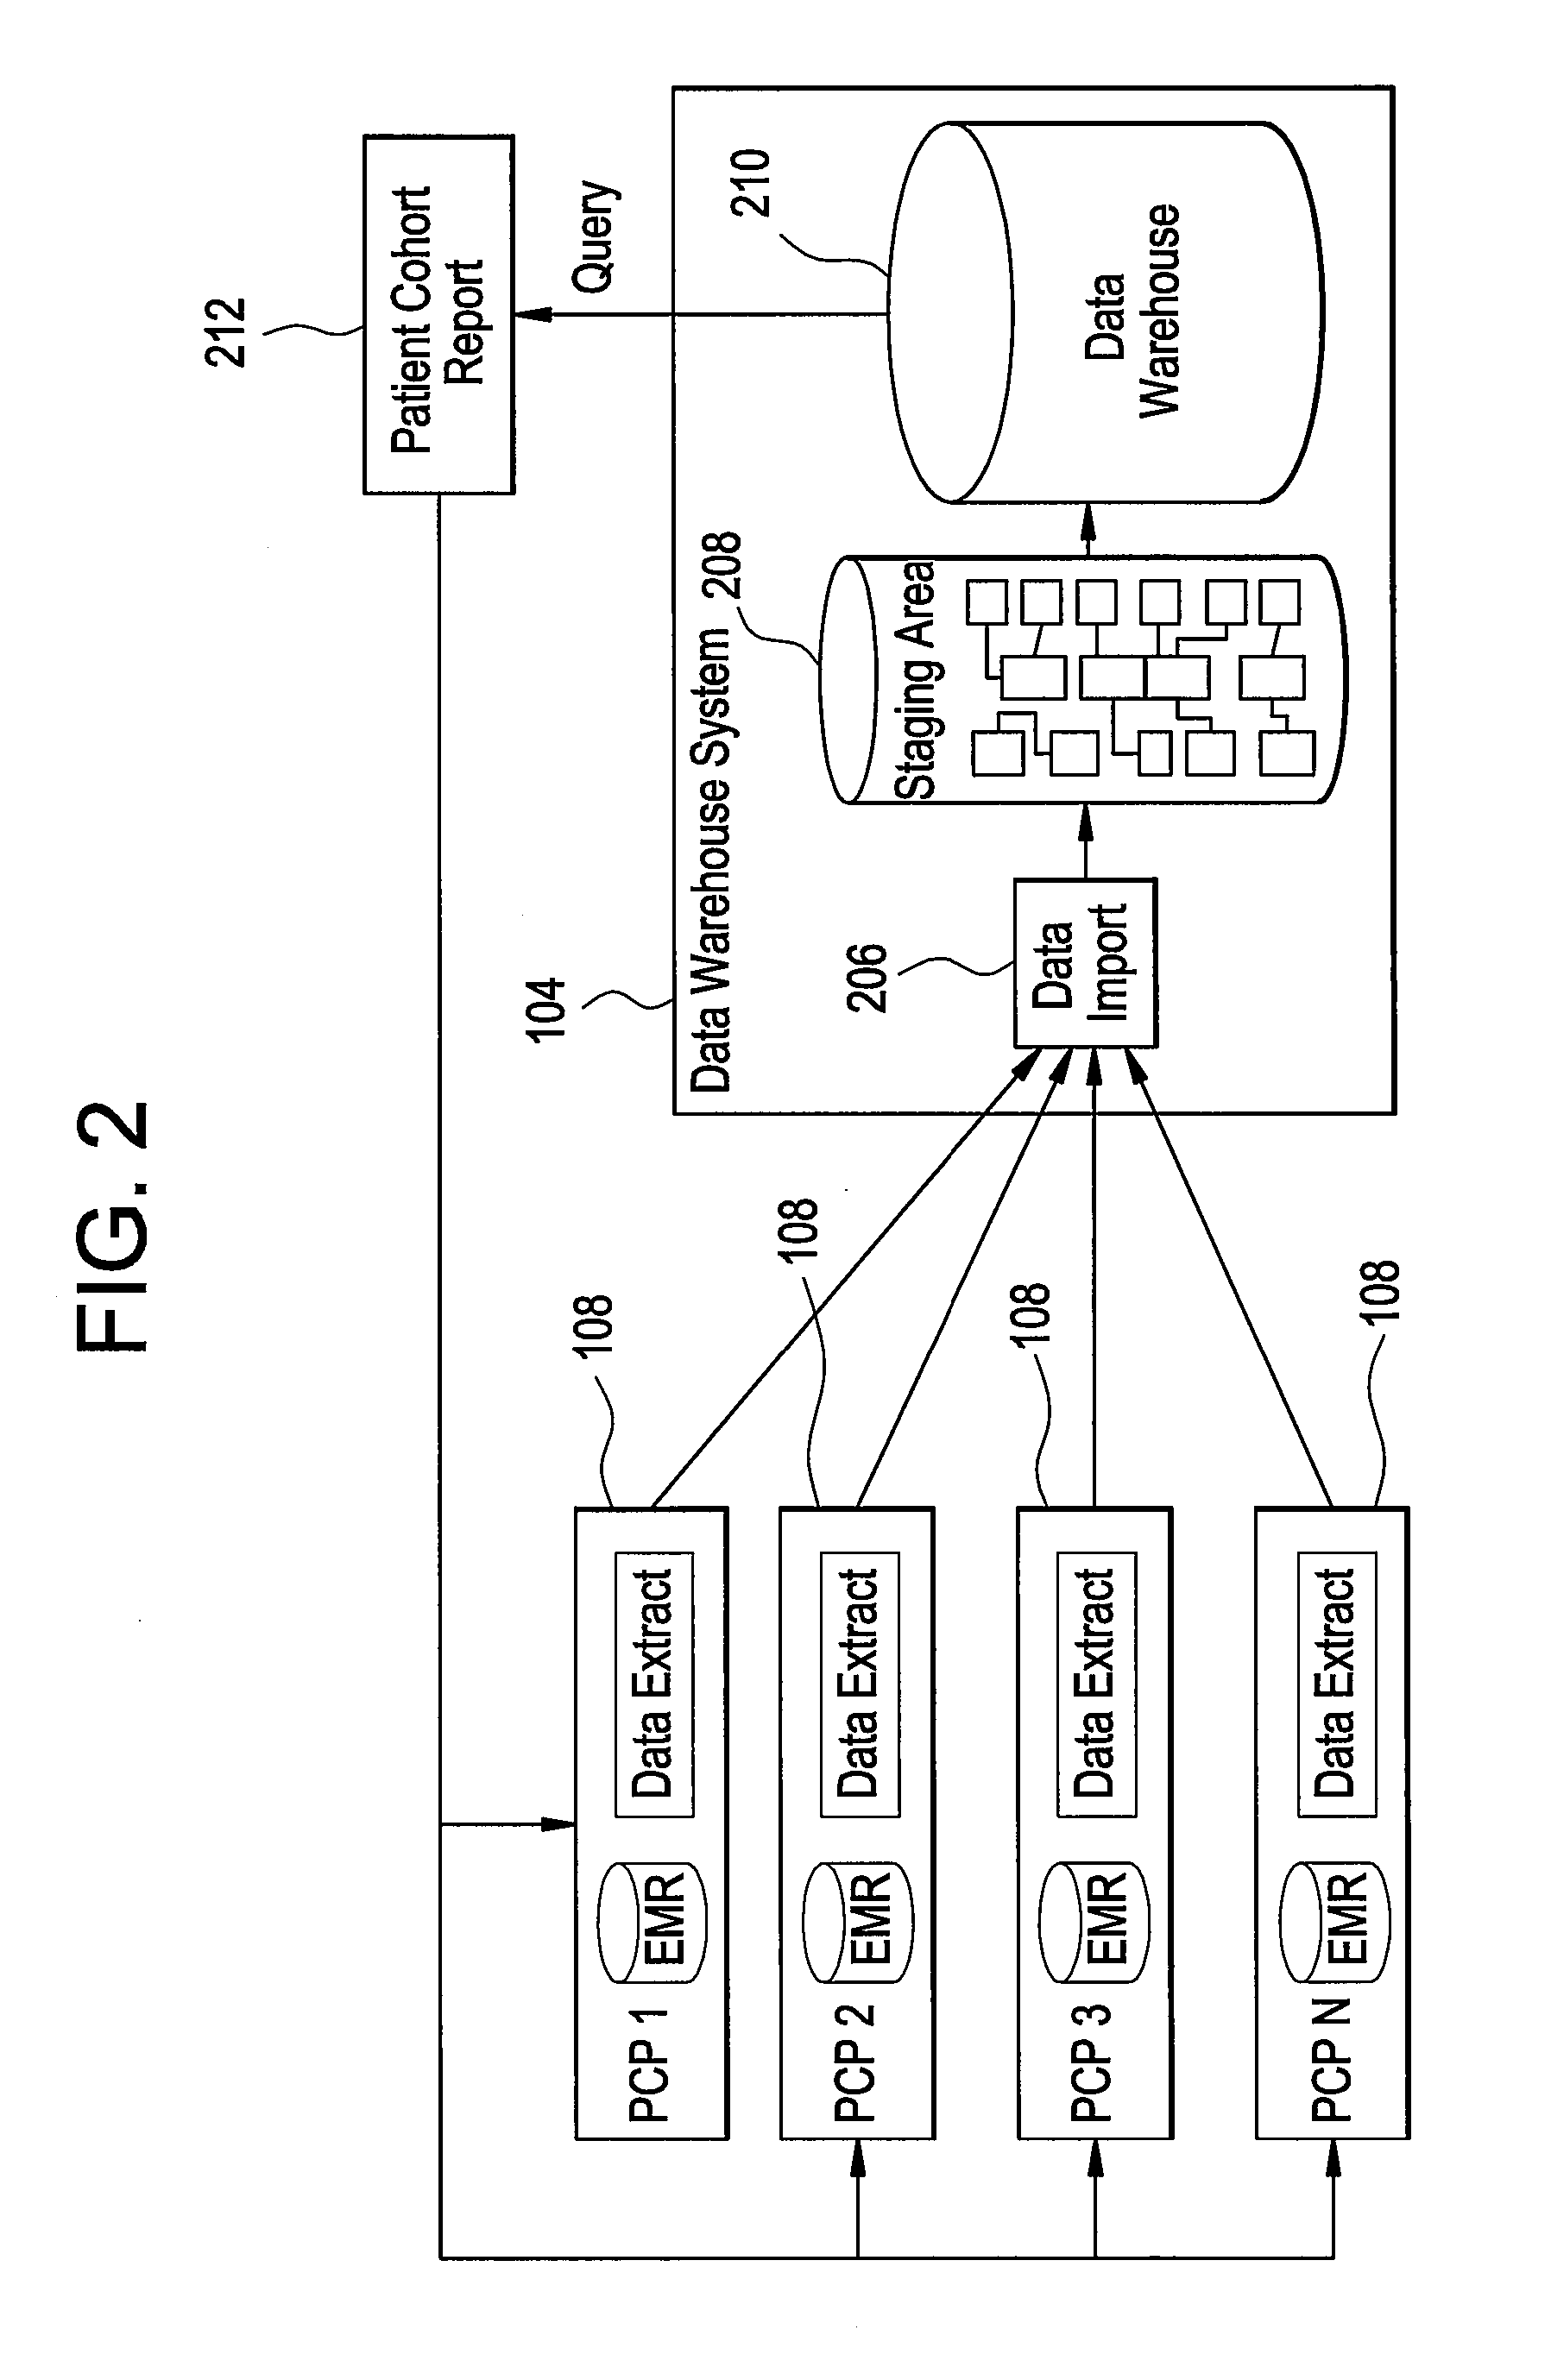 Systems and methods for free text searching of electronic medical record data